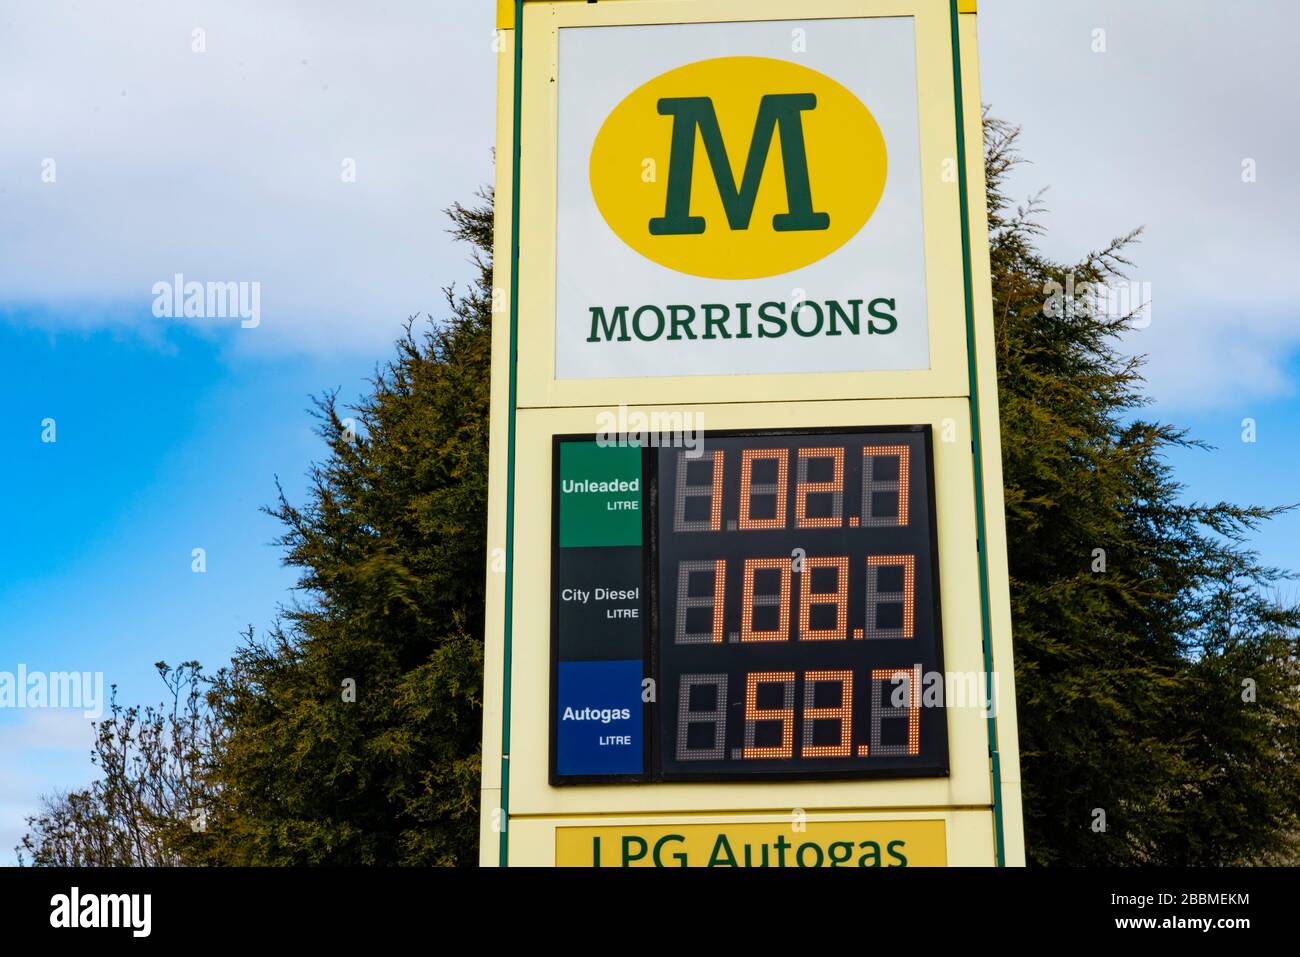 Hamilton, Scotland, UK. 1 April, 2020. Petrol stations are facing closure as the price of fuel plummets. The Petrol Retailers Association (PRA) said sites in rural areas where fuel use had collapsed the most were particularly vulnerable.The warning comes as fuel prices had their biggest weekly fall since currency records began. Iain Masterton/Alamy Live News Stock Photo